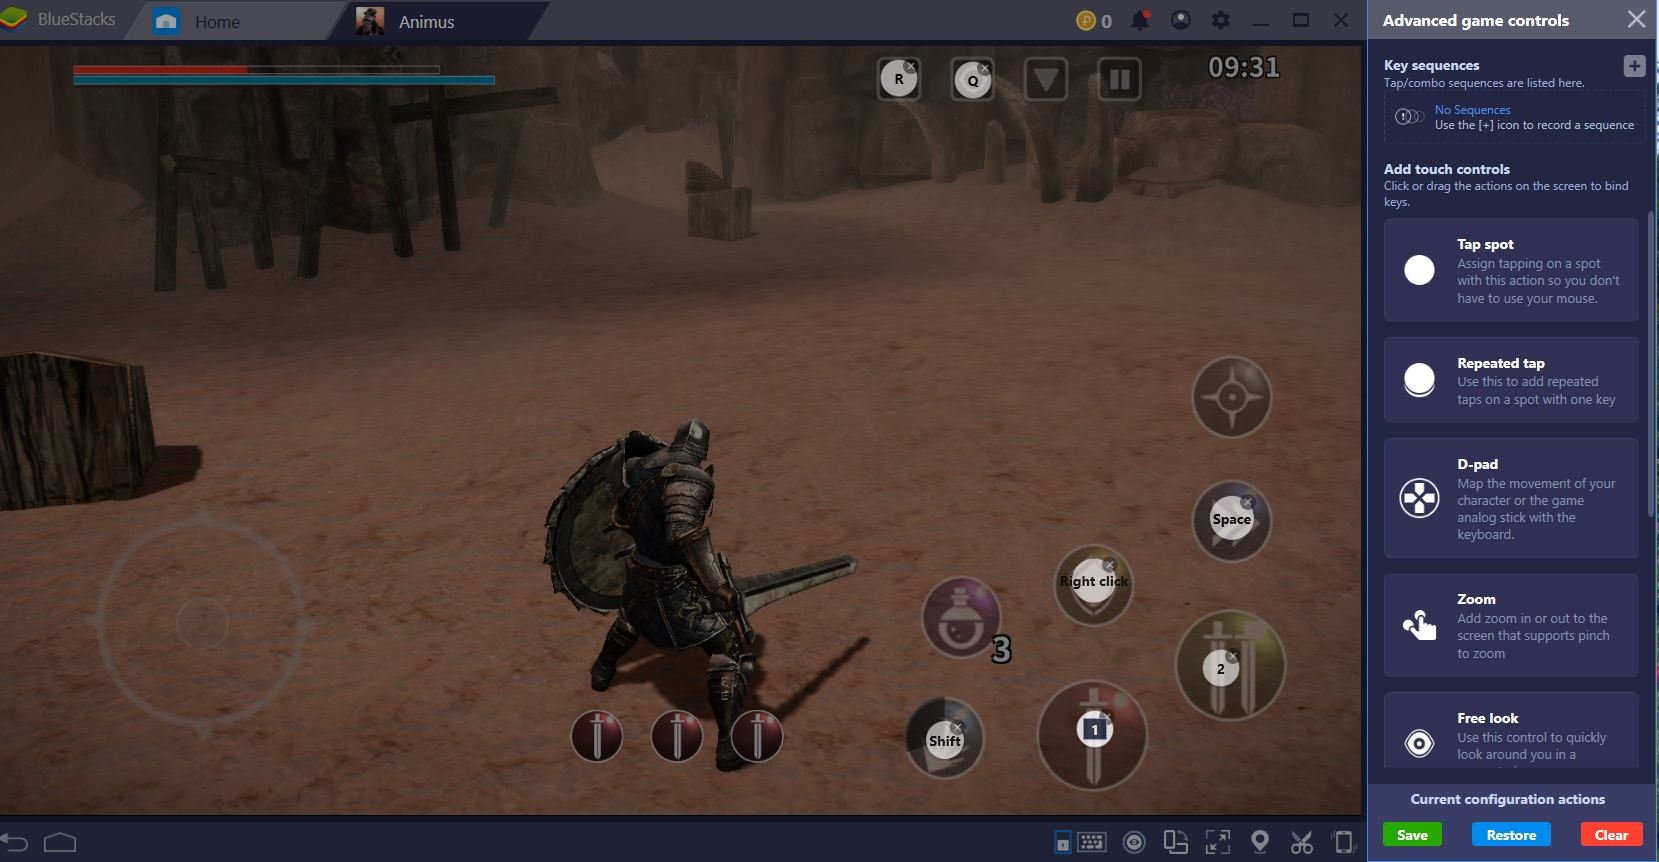 How to Beat Animus: Stand Alone on BlueStacks